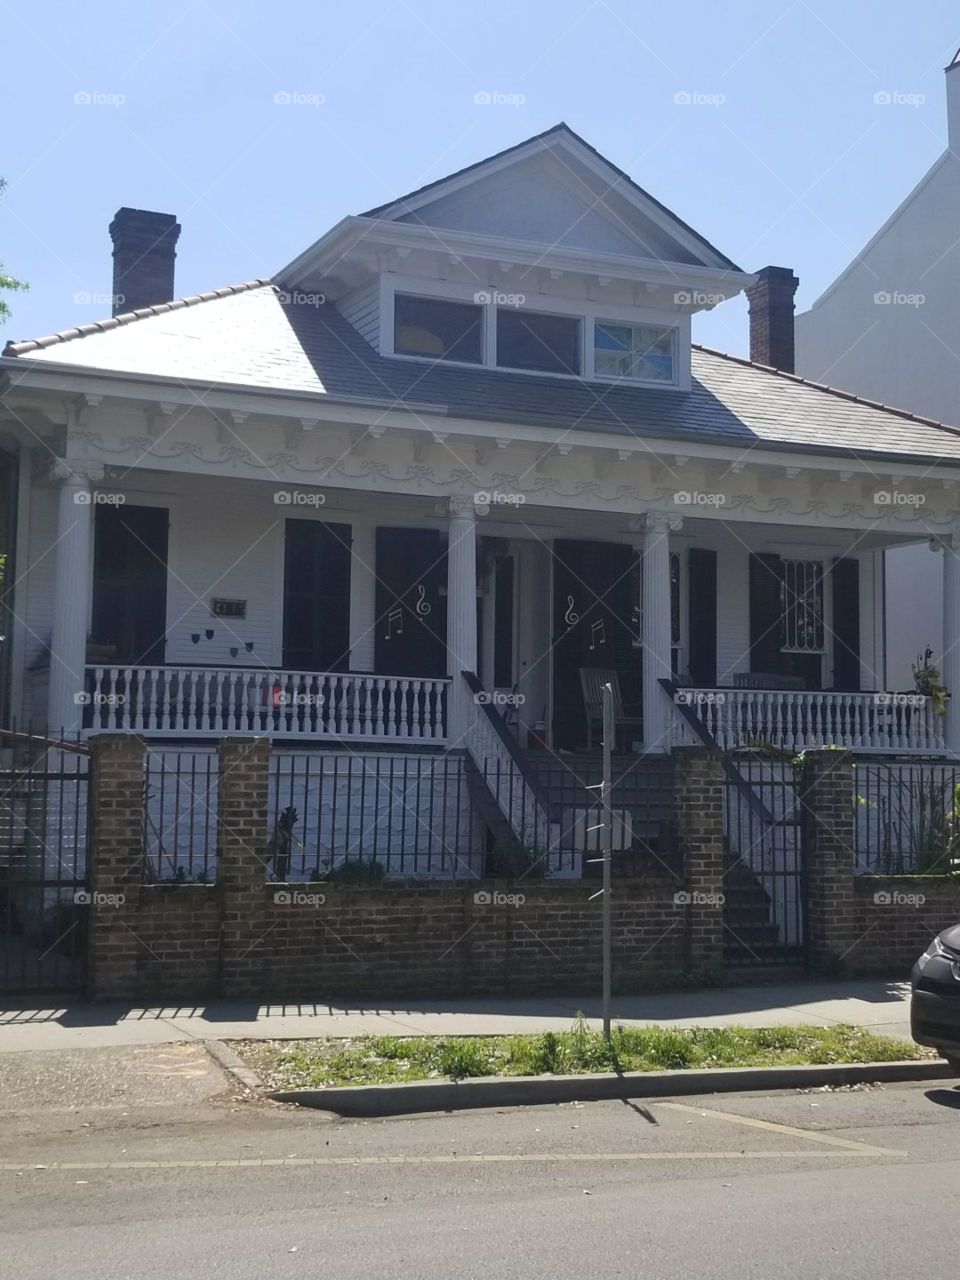 New Orleans house with musical notes